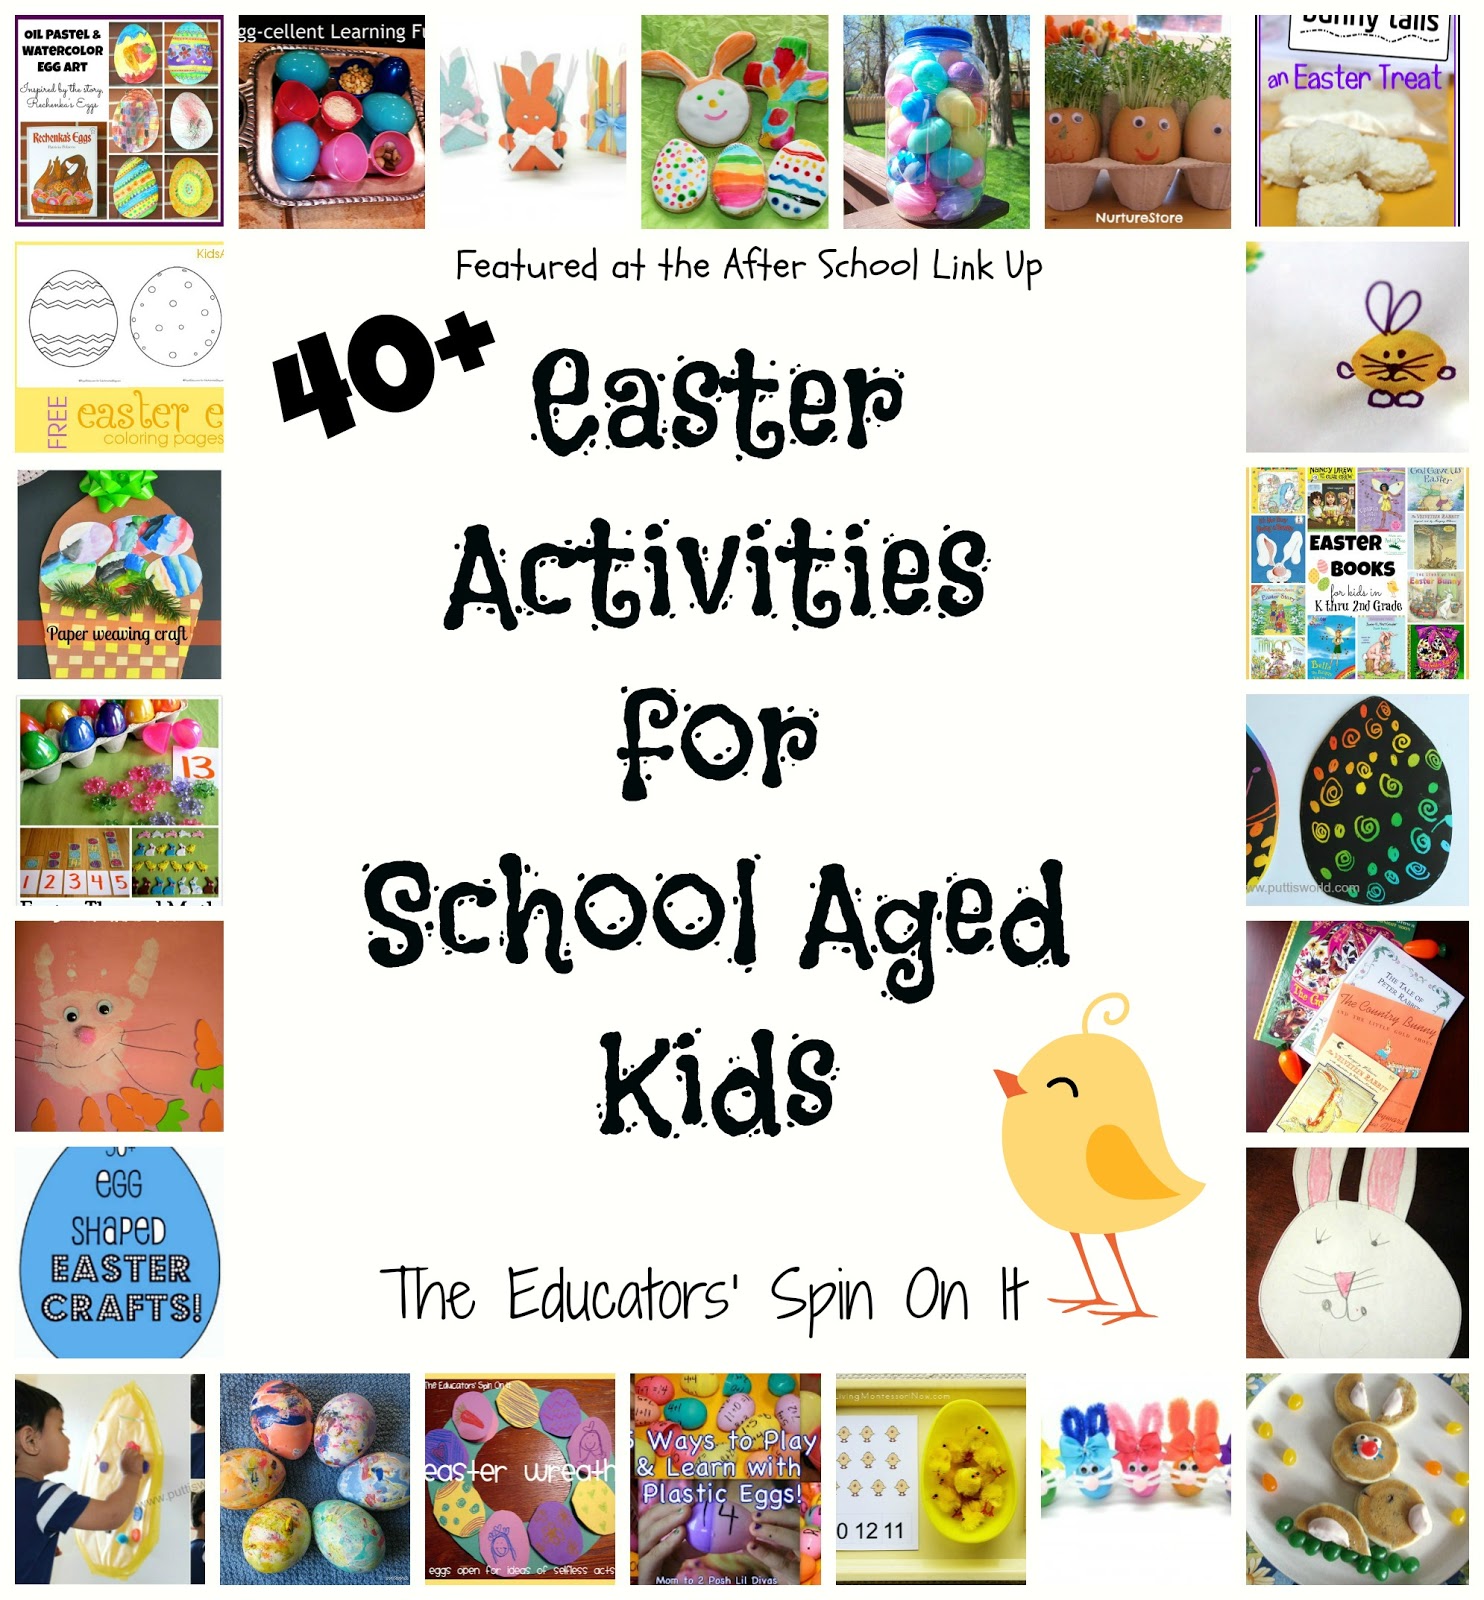 40 Easter Activities for Kids The Educators' Spin On It